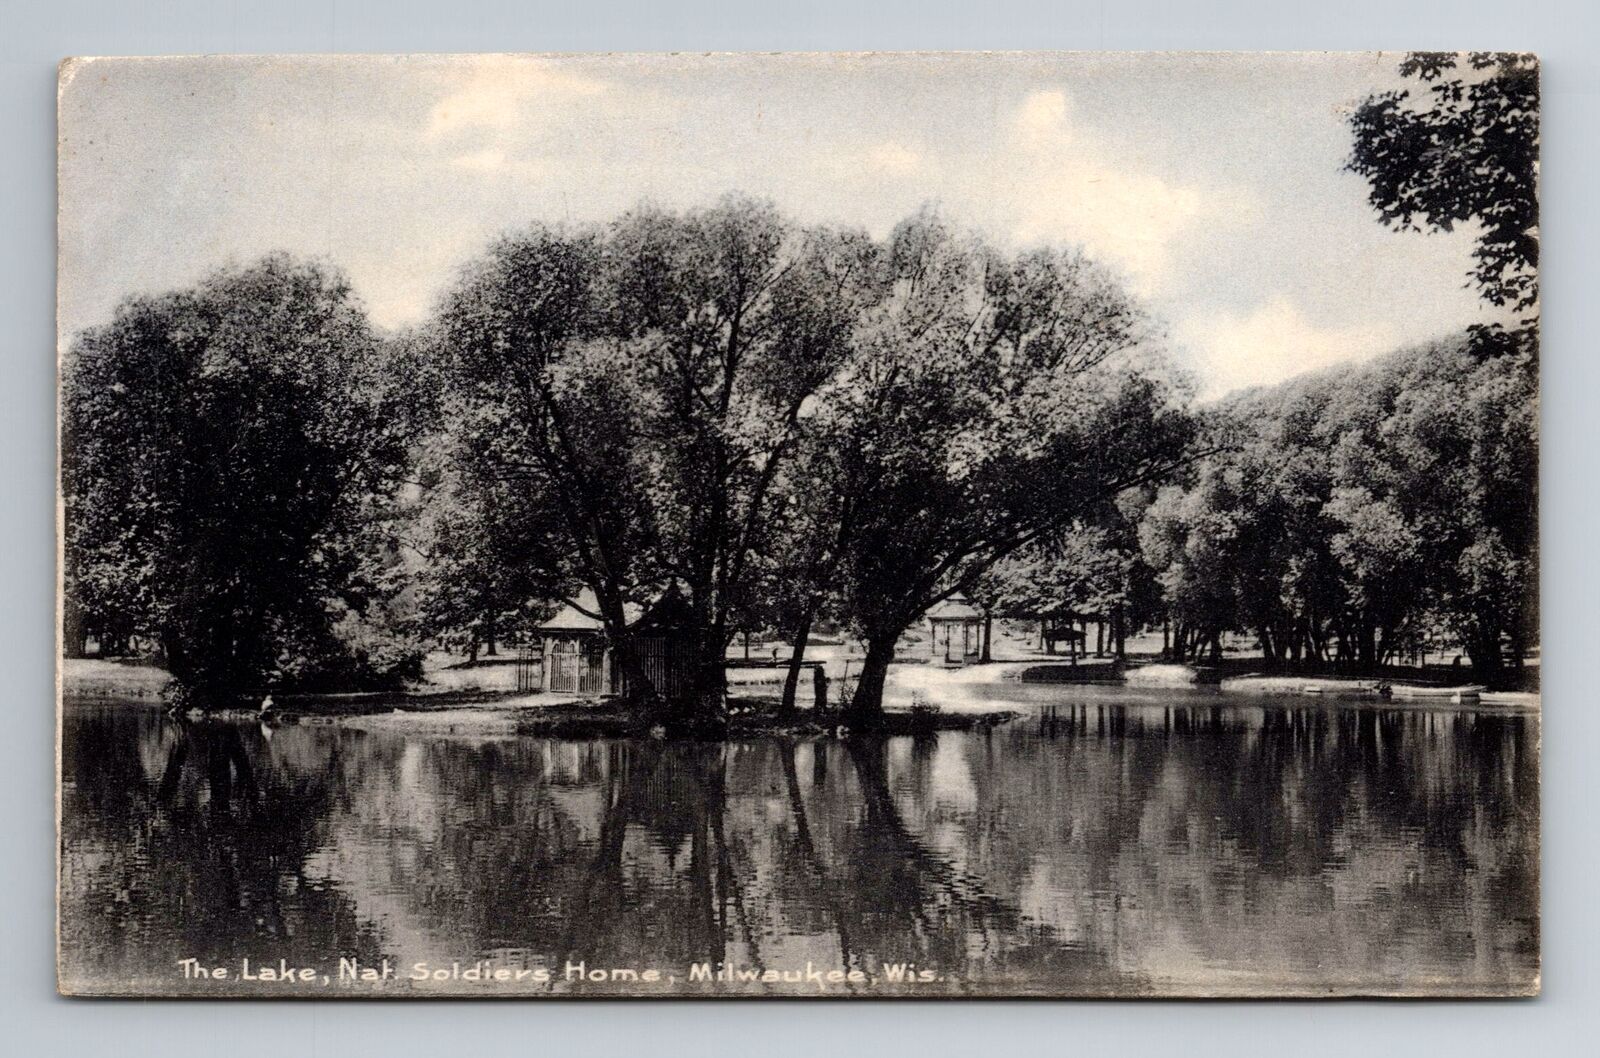 Milwaukee, WI-Wisconsin, The Lake At Soldier's Home Antique, Vintage Postcard